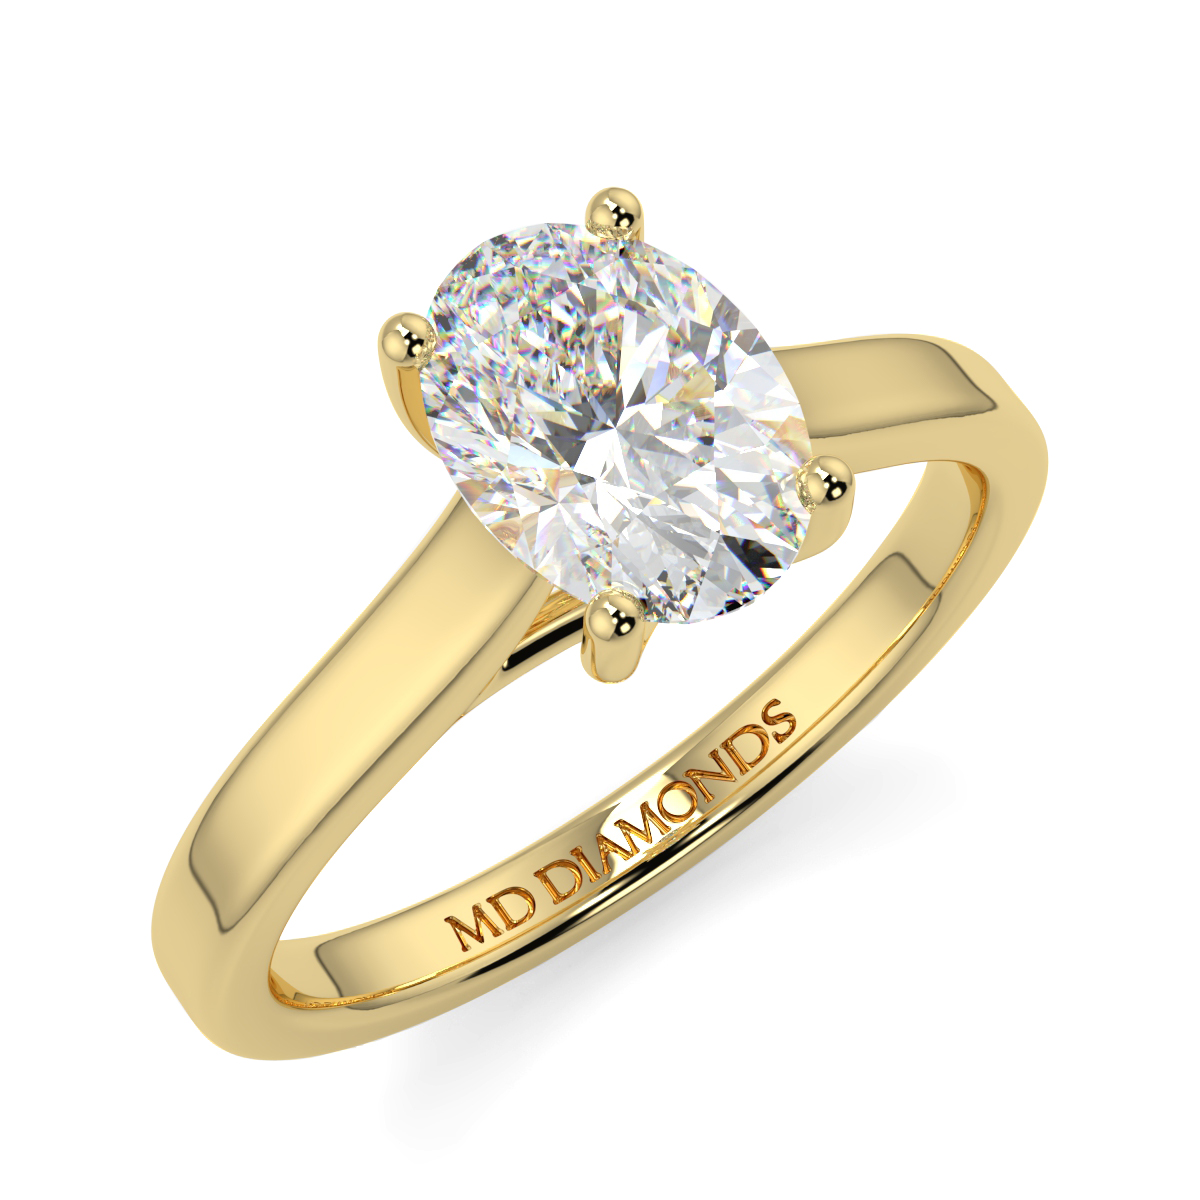 Oval Solitaire Ring